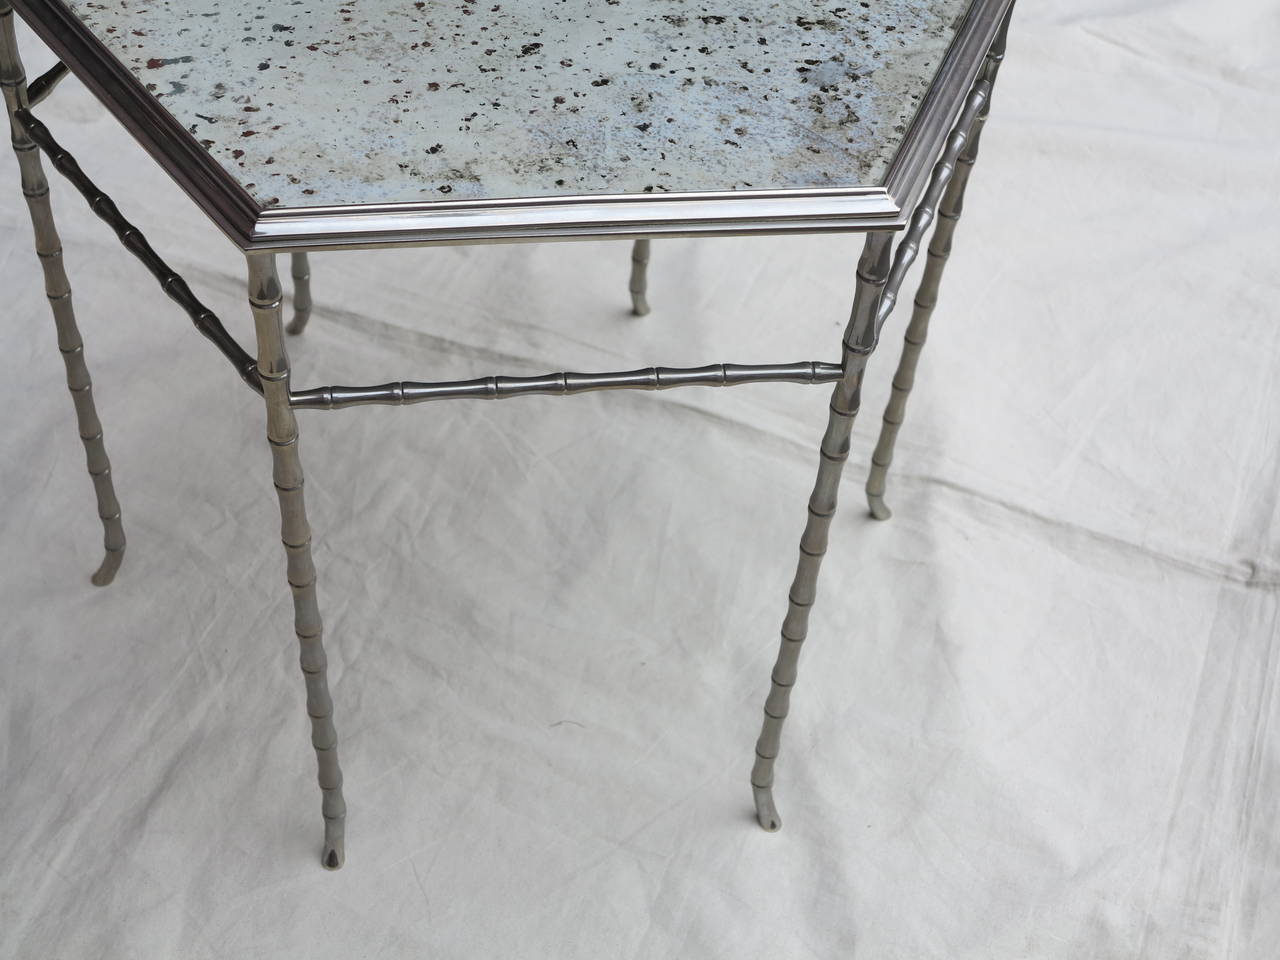 Pair of Pedestal table or table of silvered bronze model bamboo in the style of Maison Baguès, top oxidized and silvered mirror, everything is screwed, good condition,some traces of using with age 62 cm is the diagonal, circa 1950-1970.